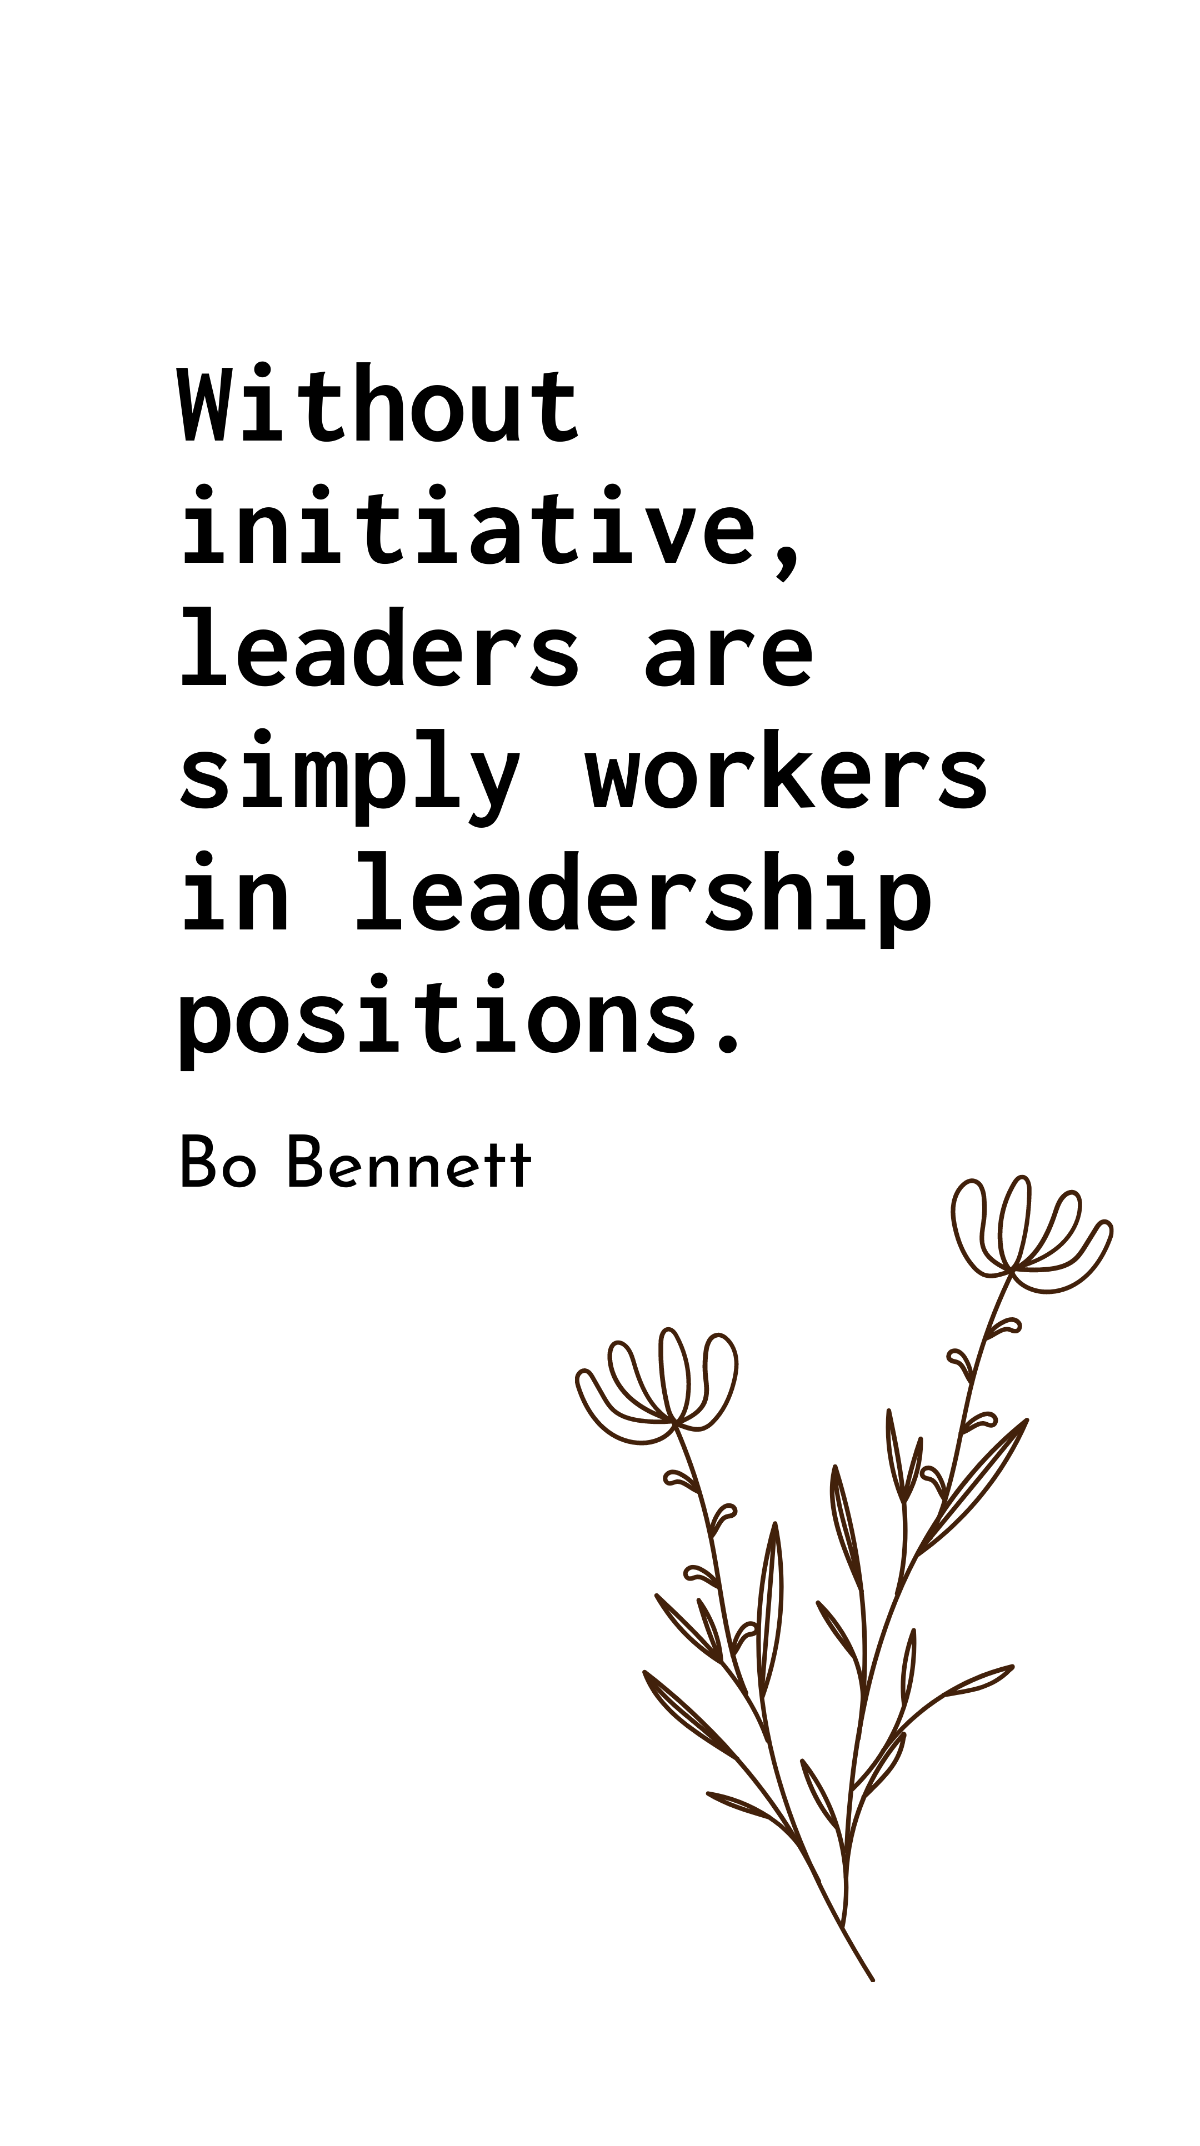 Bo Bennett - Without initiative, leaders are simply workers in leadership positions. Template